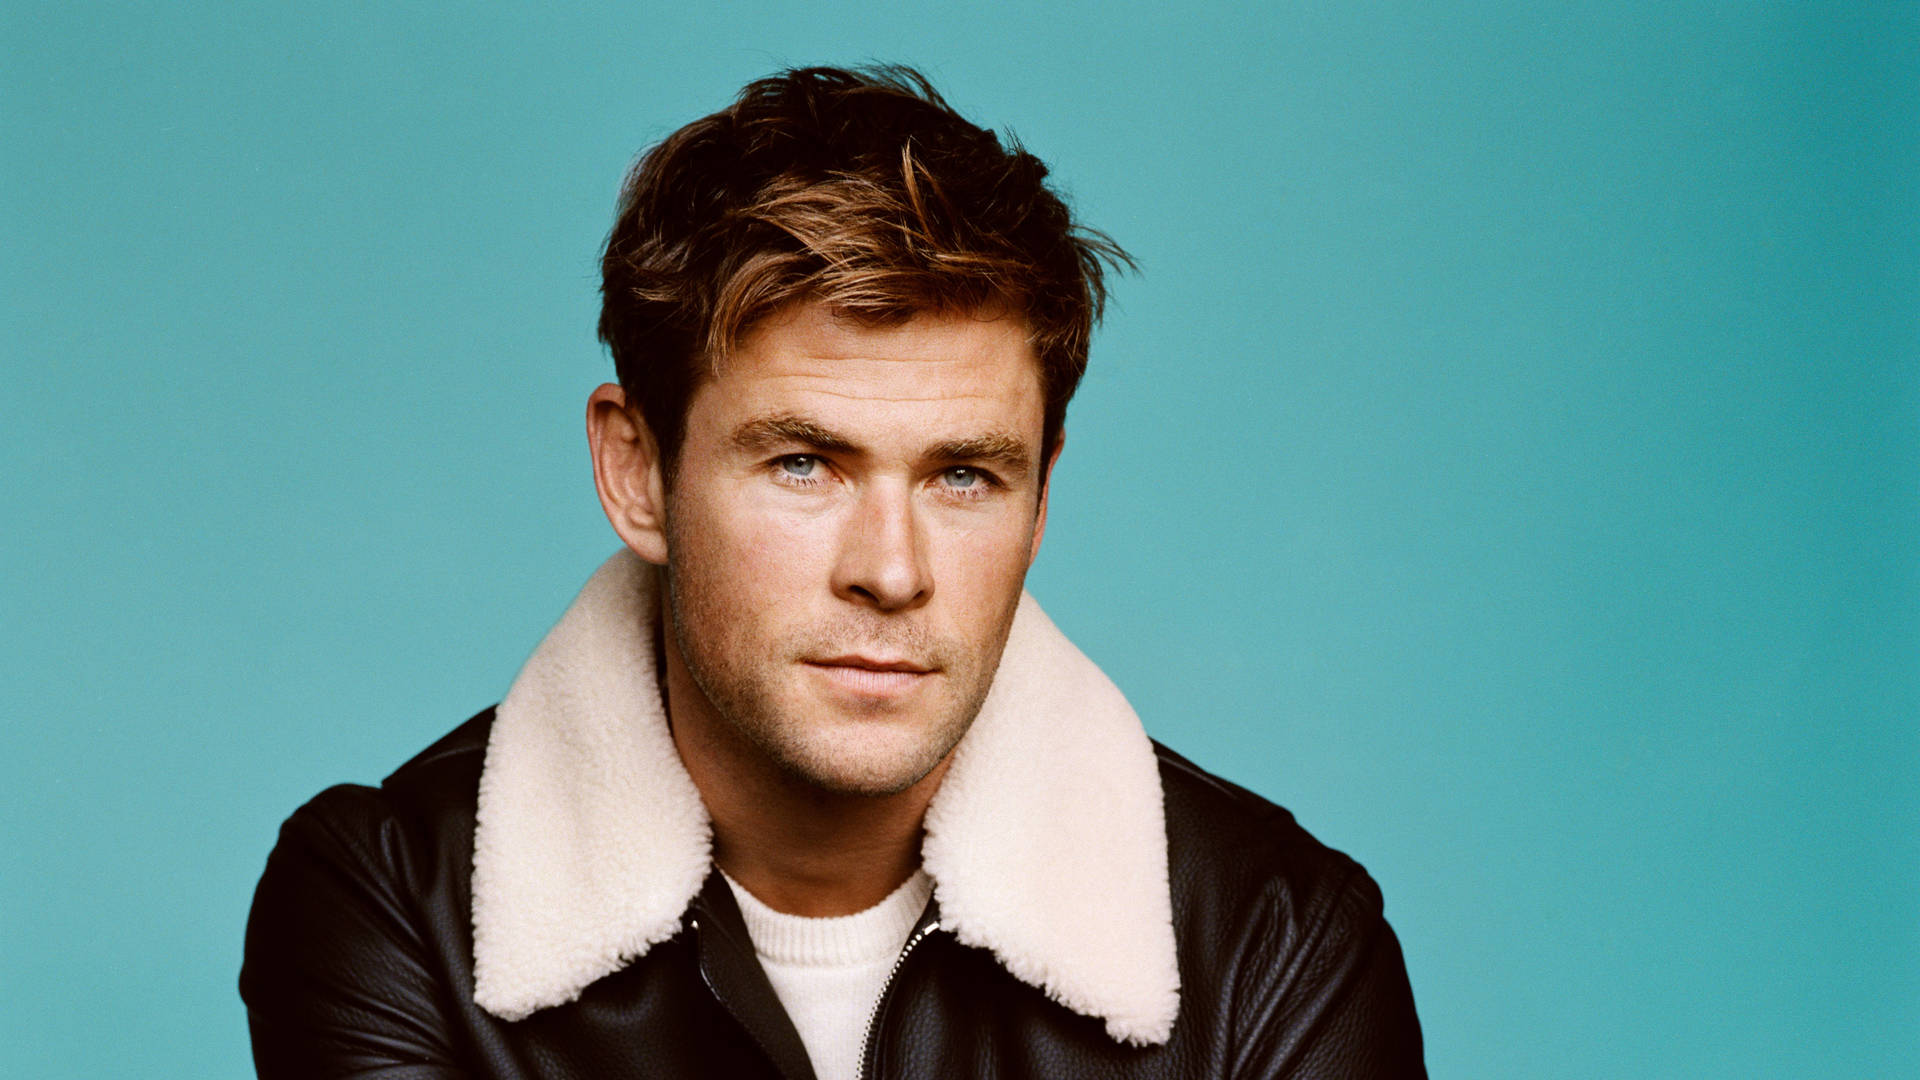 Chris Hemsworth In Fur And Leather Jacket Background